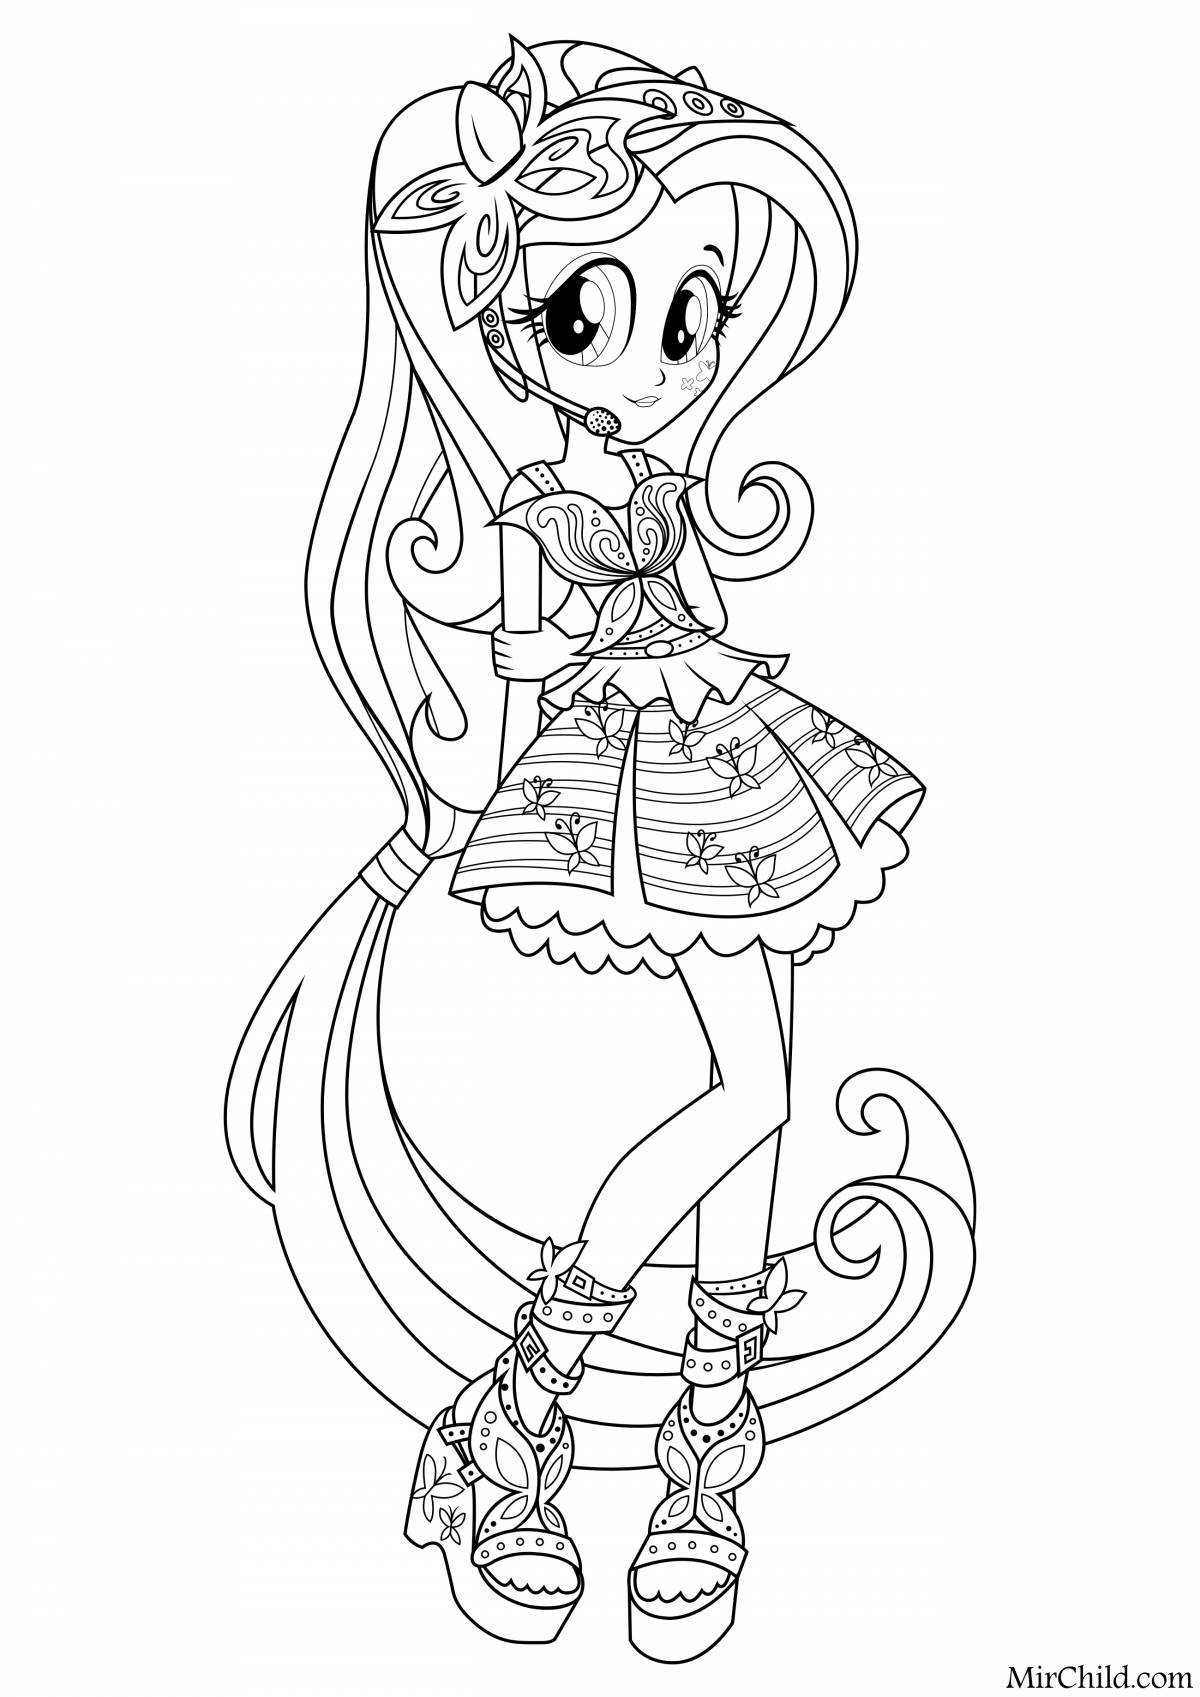 My little pony girls coloring page playful